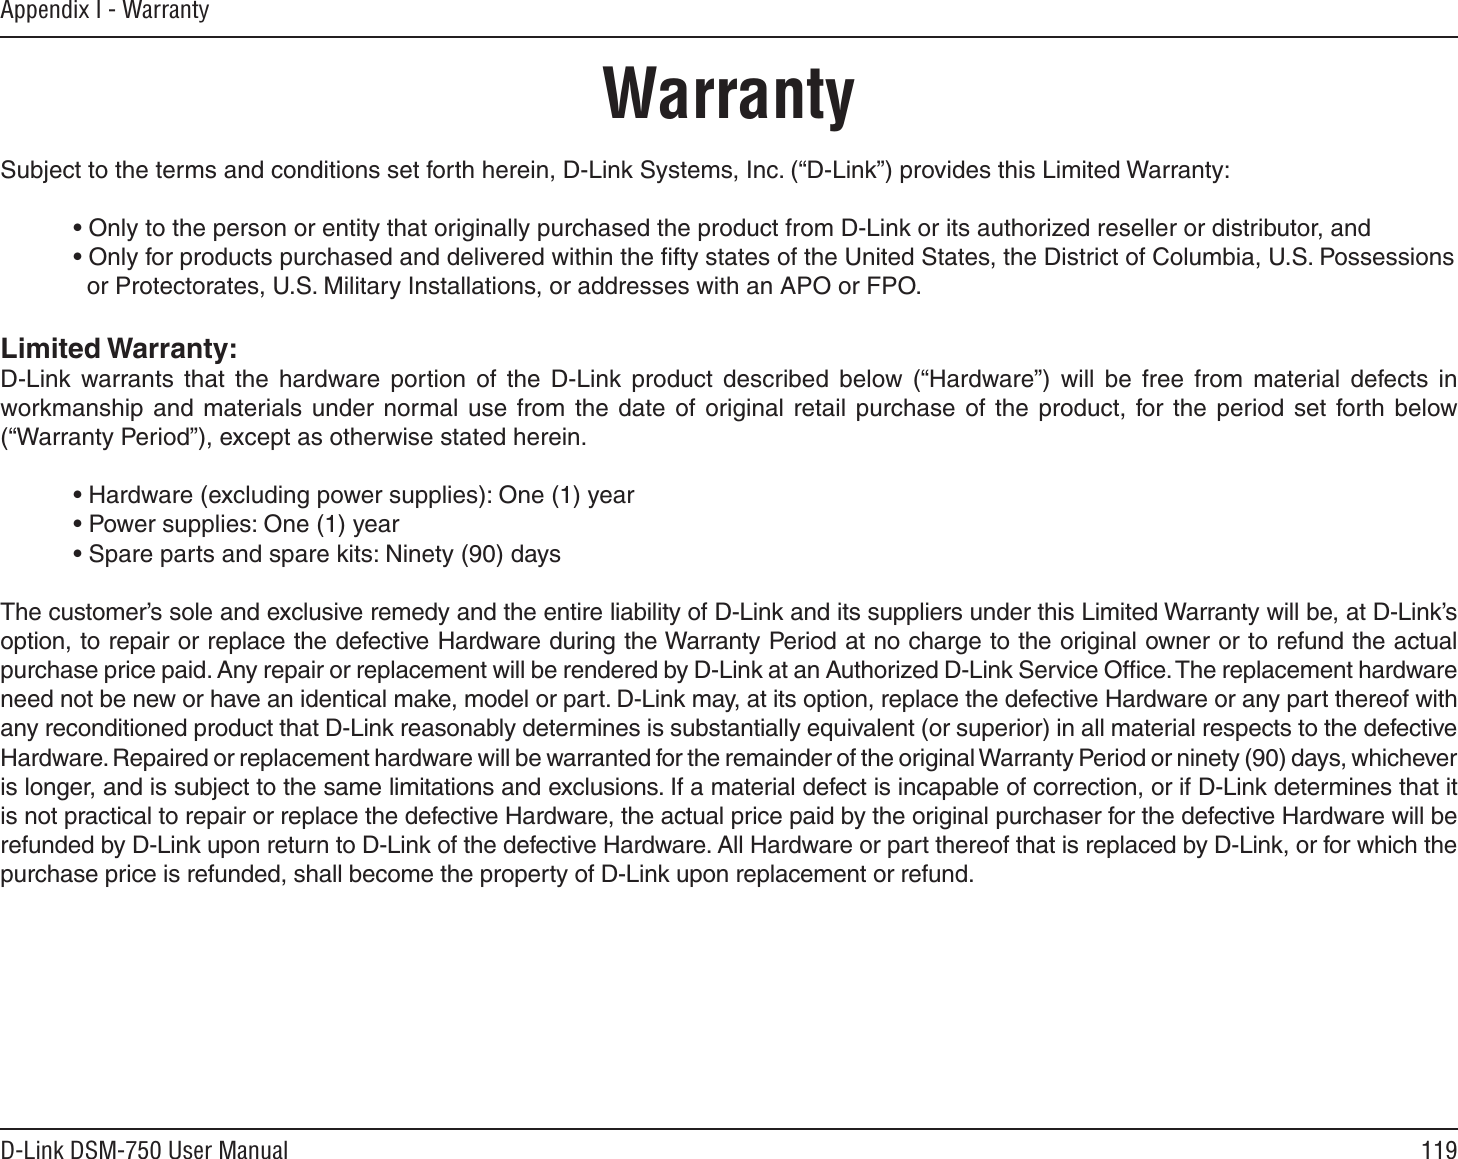 119D-Link DSM-750 User ManualAppendix I - WarrantyWarrantySubject to the terms and conditions set forth herein, D-Link Systems, Inc. (“D-Link”) provides this Limited Warranty:• Only to the person or entity that originally purchased the product from D-Link or its authorized reseller or distributor, and• Only for products purchased and delivered within the ﬁfty states of the United States, the District of Columbia, U.S. Possessions   or Protectorates, U.S. Military Installations, or addresses with an APO or FPO.Limited Warranty:D-Link warrants that the hardware portion of the D-Link product described below (“Hardware”) will be free from material defects in workmanship and materials under normal use from the date of original retail purchase of the product, for the period set forth below (“Warranty Period”), except as otherwise stated herein.• Hardware (excluding power supplies): One (1) year• Power supplies: One (1) year• Spare parts and spare kits: Ninety (90) daysThe customer’s sole and exclusive remedy and the entire liability of D-Link and its suppliers under this Limited Warranty will be, at D-Link’s option, to repair or replace the defective Hardware during the Warranty Period at no charge to the original owner or to refund the actual purchase price paid. Any repair or replacement will be rendered by D-Link at an Authorized D-Link Service Ofﬁce. The replacement hardware need not be new or have an identical make, model or part. D-Link may, at its option, replace the defective Hardware or any part thereof with any reconditioned product that D-Link reasonably determines is substantially equivalent (or superior) in all material respects to the defective Hardware. Repaired or replacement hardware will be warranted for the remainder of the original Warranty Period or ninety (90) days, whichever is longer, and is subject to the same limitations and exclusions. If a material defect is incapable of correction, or if D-Link determines that it is not practical to repair or replace the defective Hardware, the actual price paid by the original purchaser for the defective Hardware will be refunded by D-Link upon return to D-Link of the defective Hardware. All Hardware or part thereof that is replaced by D-Link, or for which the purchase price is refunded, shall become the property of D-Link upon replacement or refund.